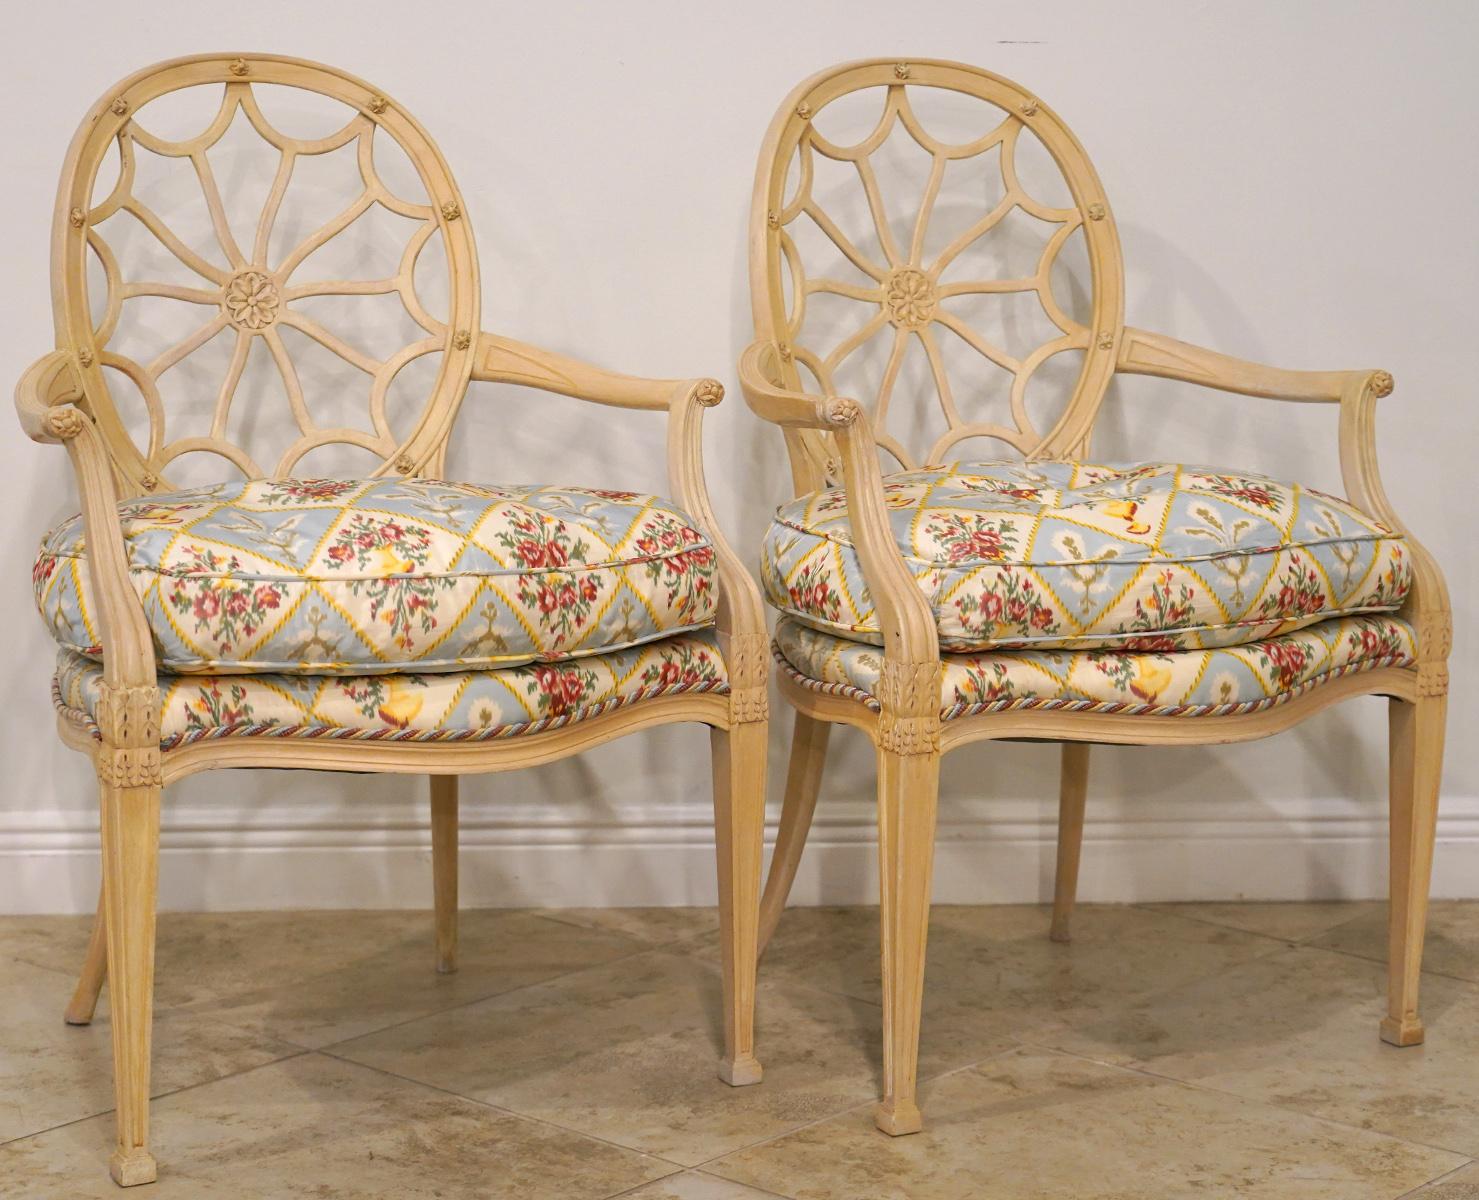 American Pair of Hepplewhite Style Antique White Painted Spiderweb Armchairs